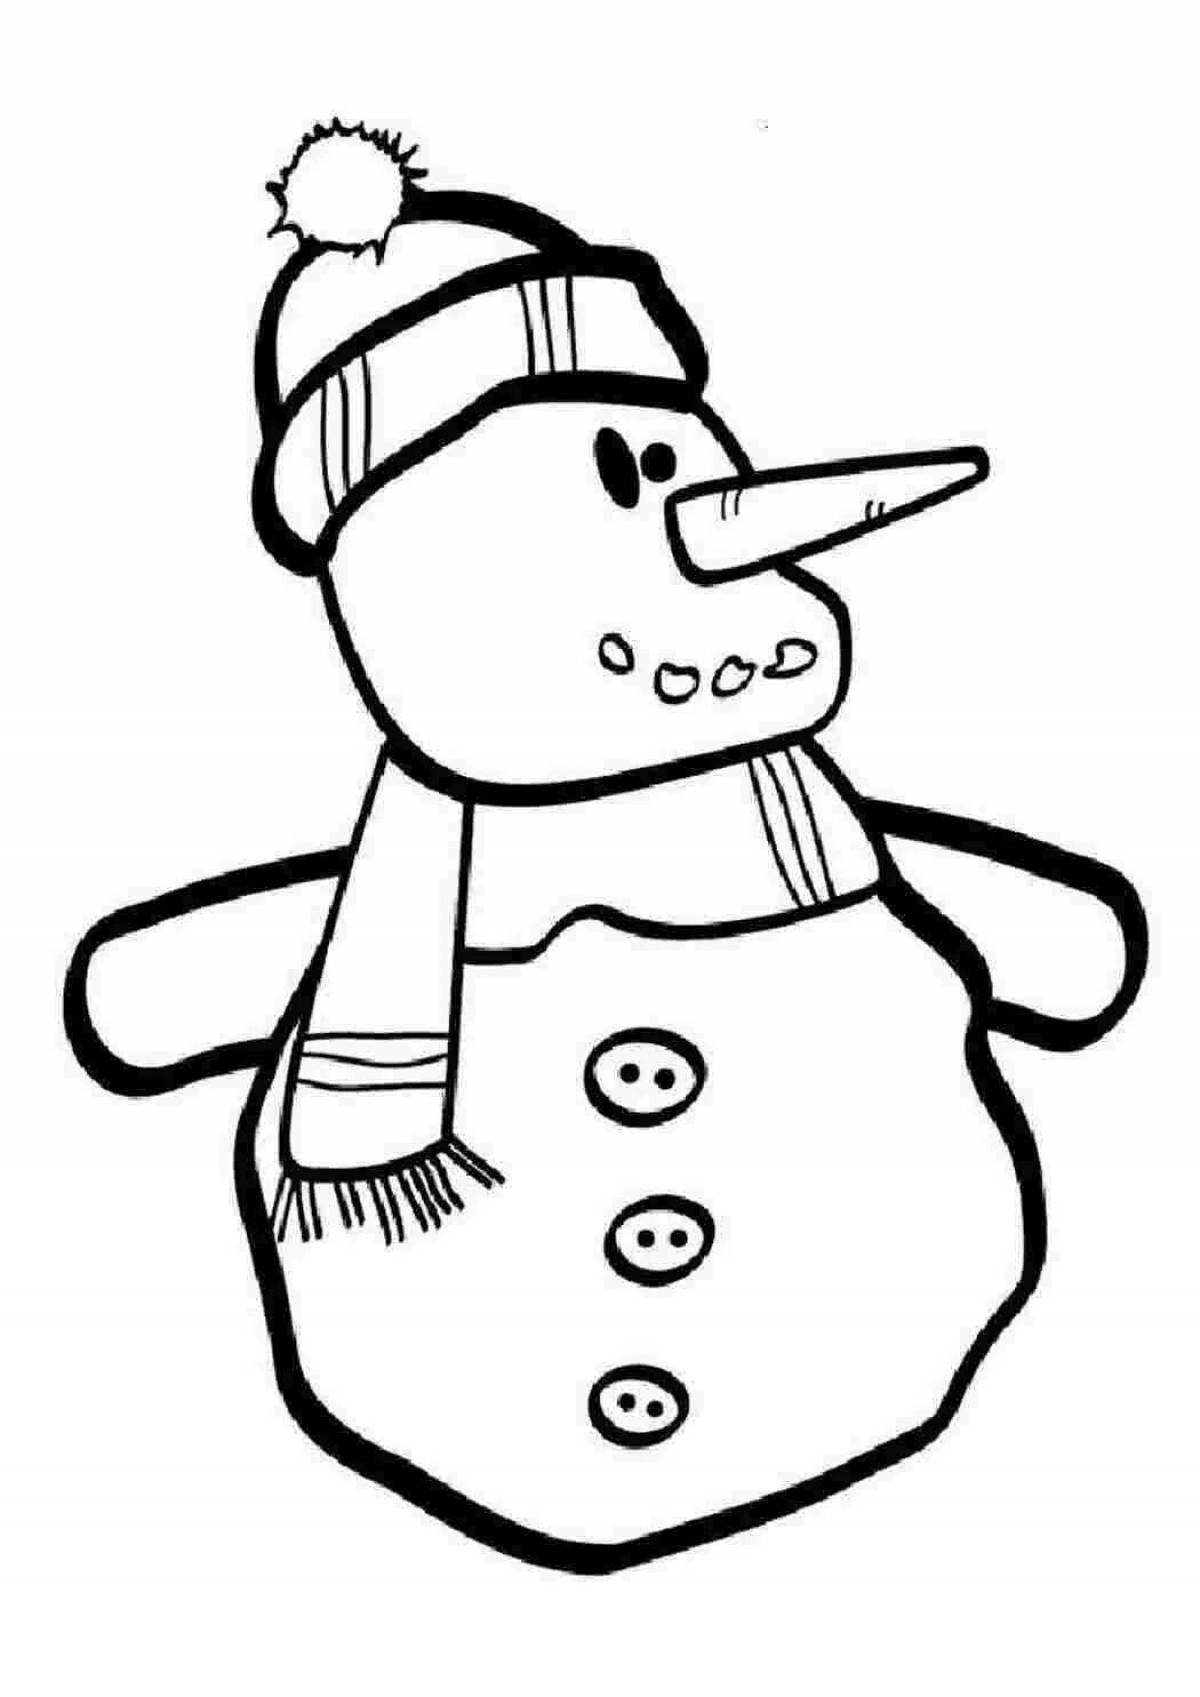 Cute funny snowman coloring book for kids